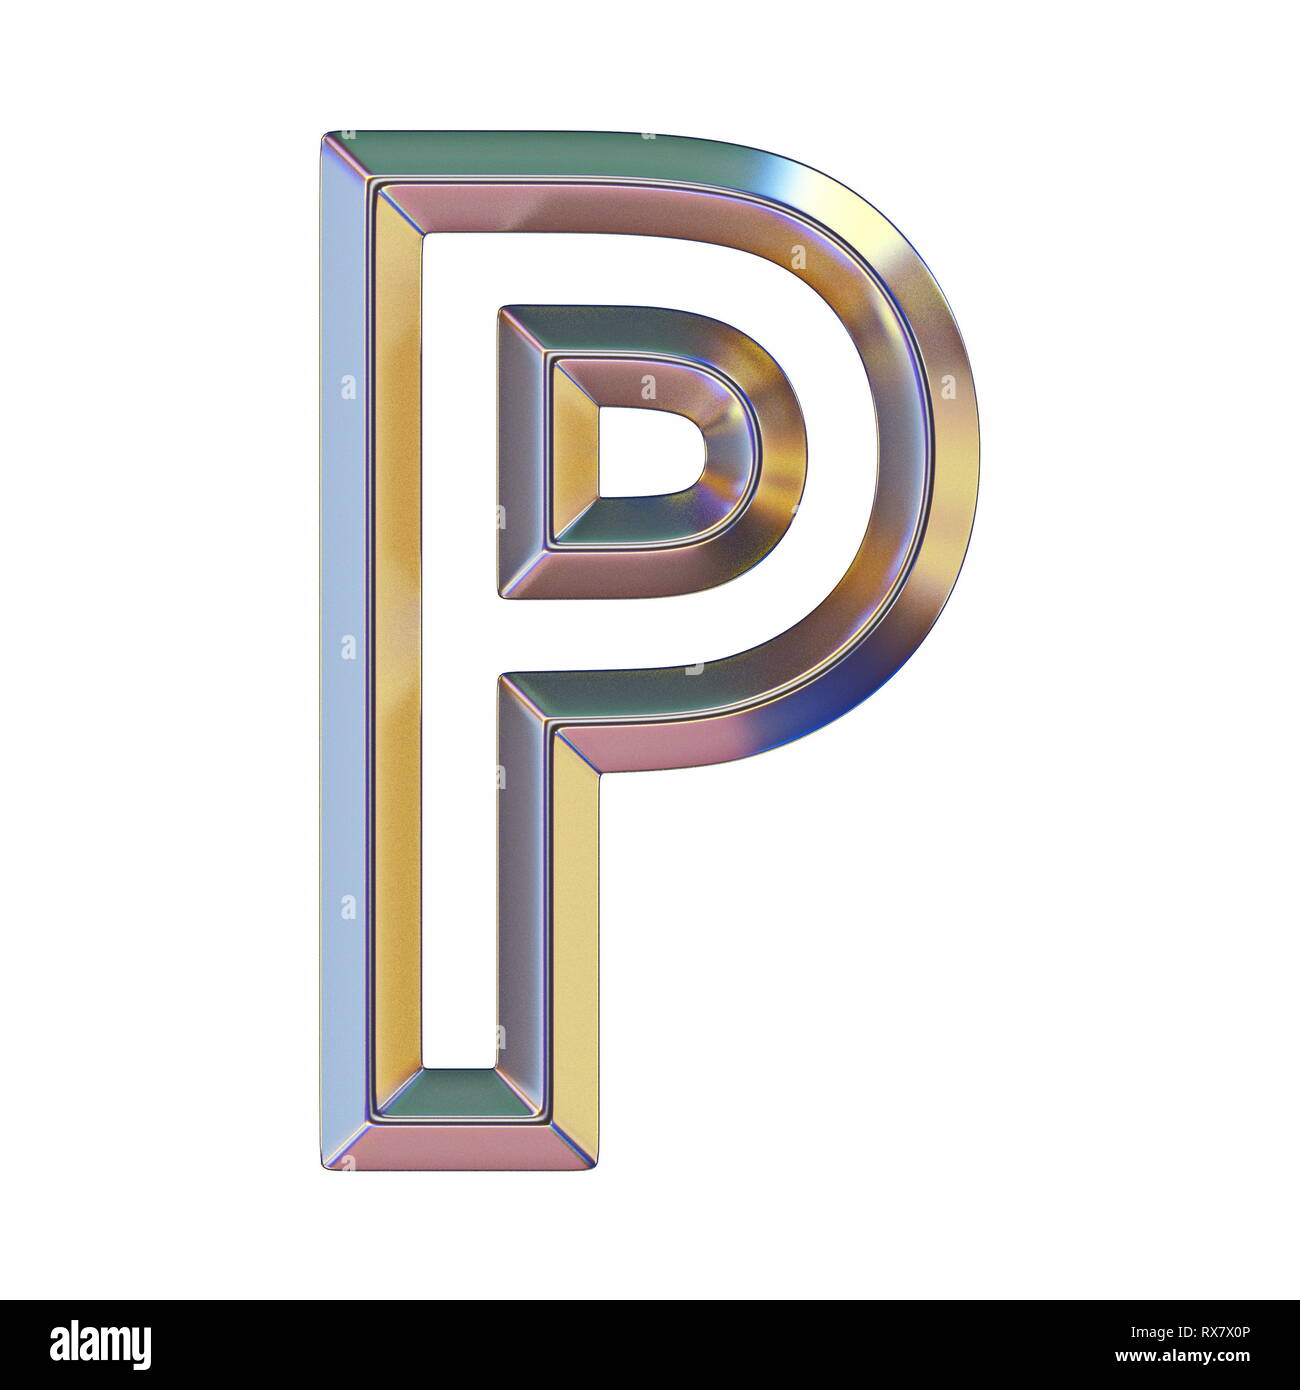 Chrome font with colorful reflections Letter P 3D render illustration isolated on white background Stock Photo